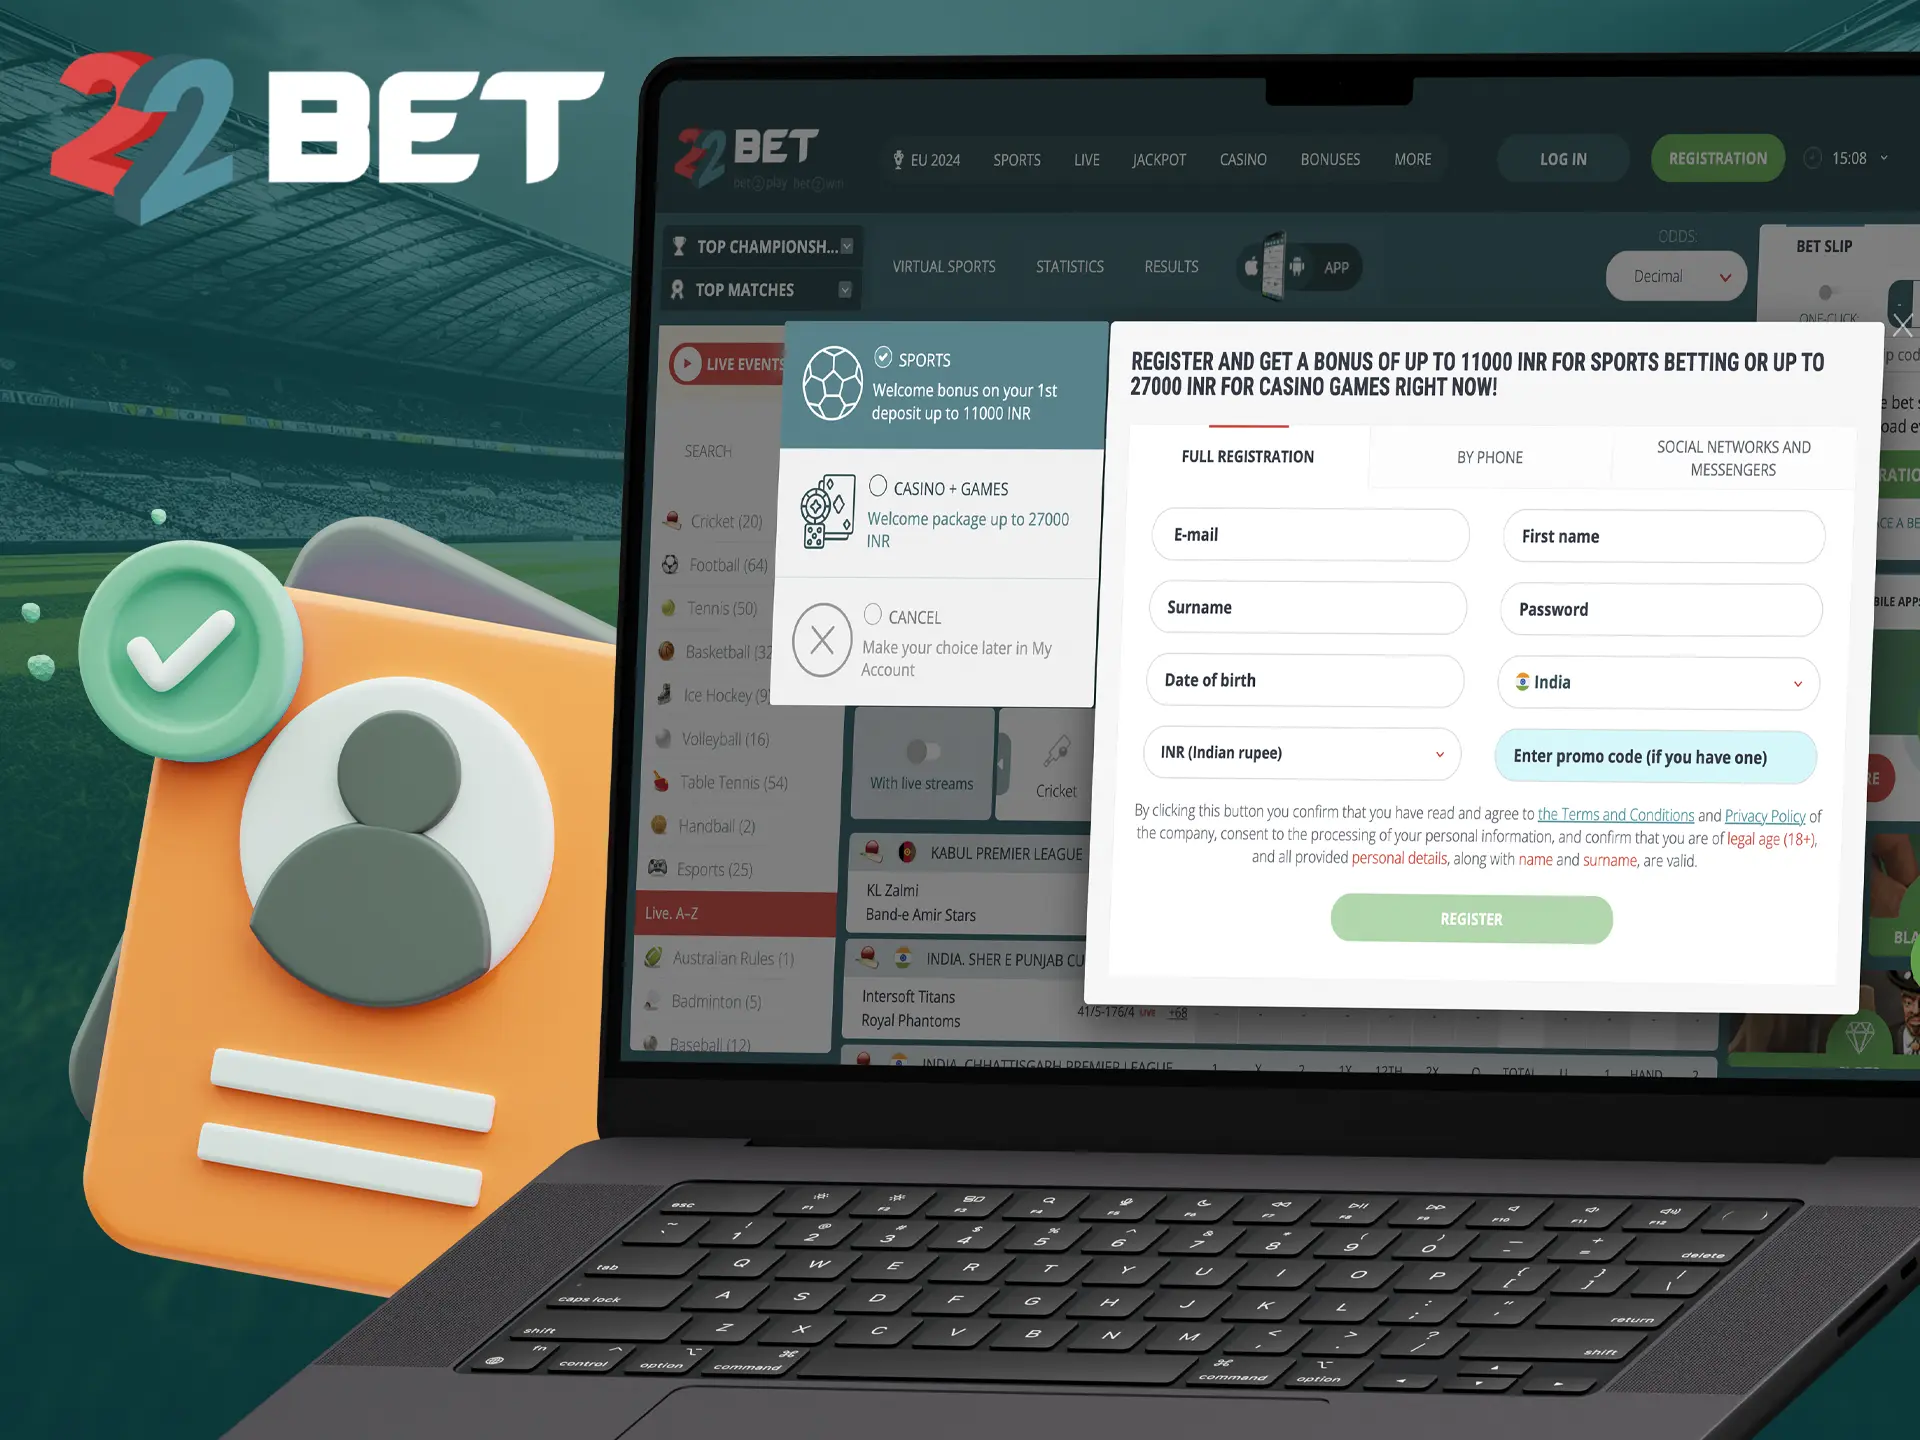 Sign up and get unforgettable emotions from victories when betting at 22Bet.